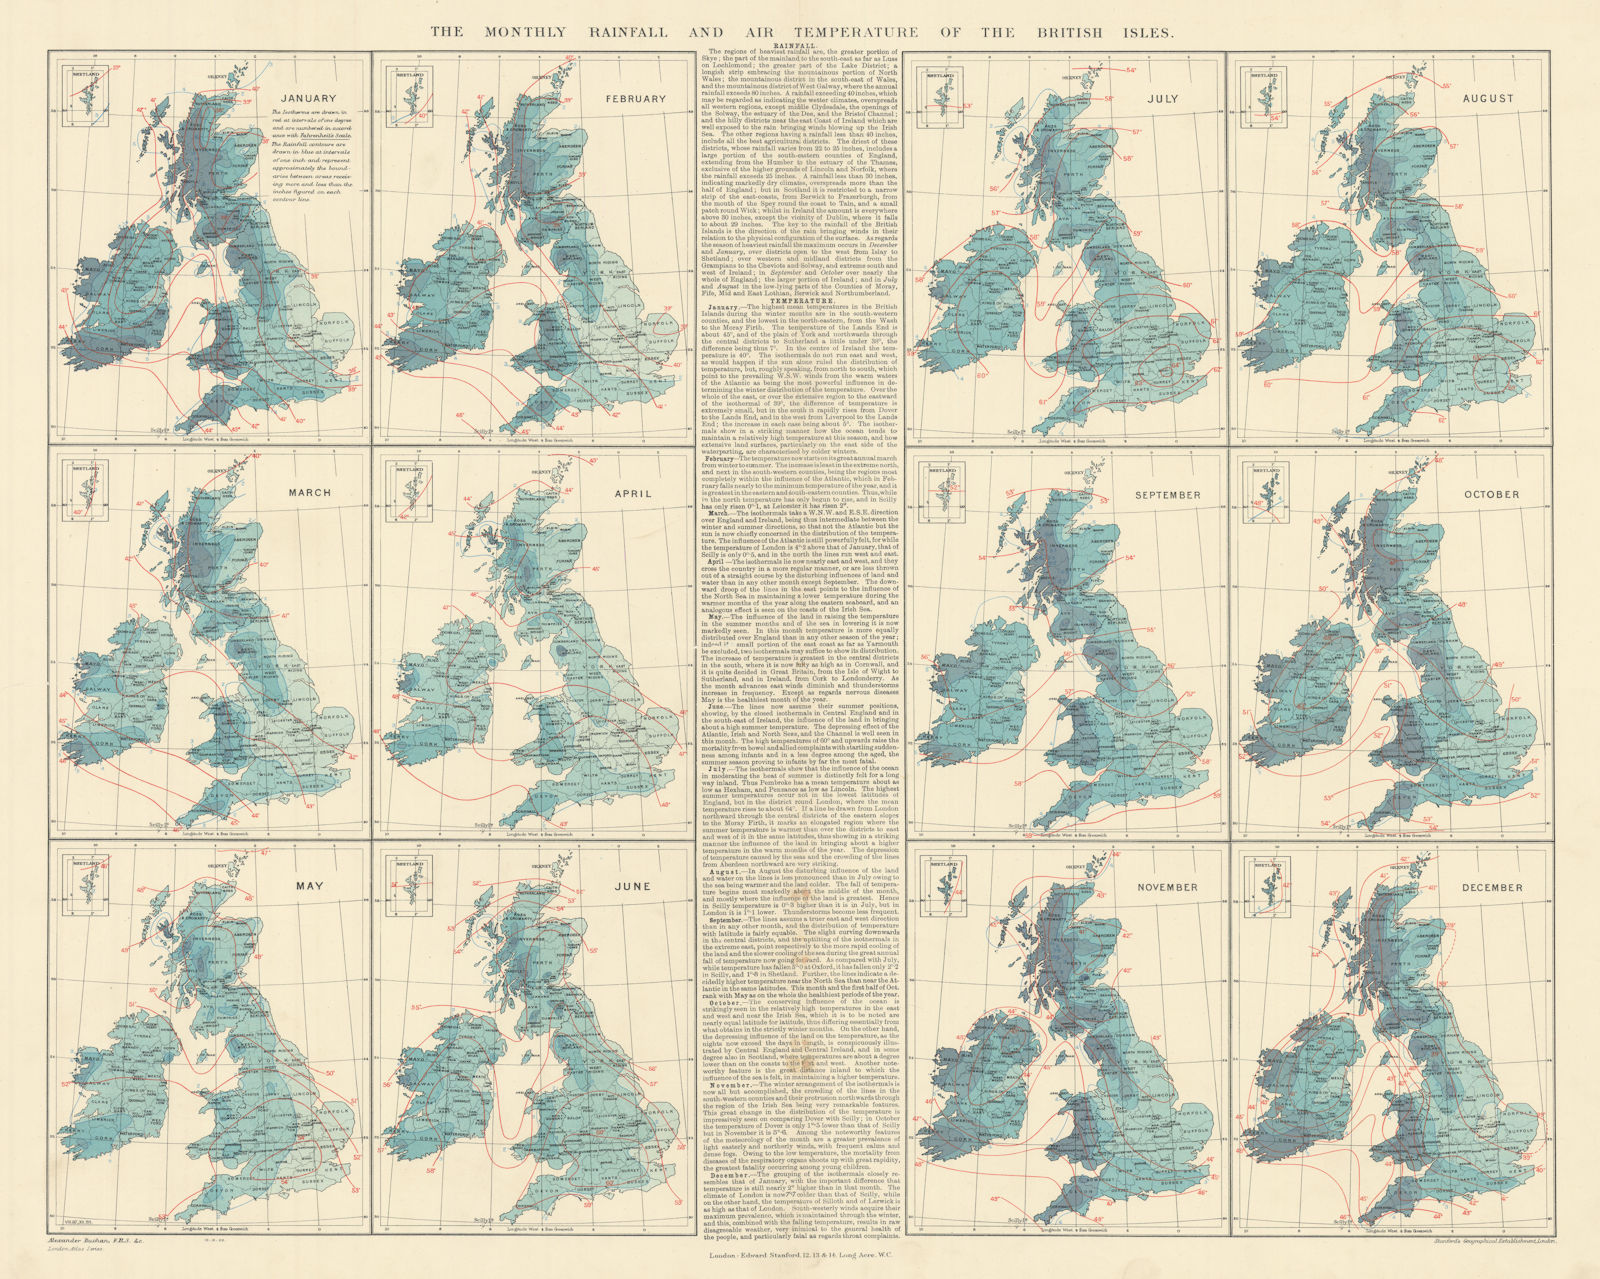 British Isles. Monthly rainfall & air temperature. 61x55cm. STANFORD 1904 map